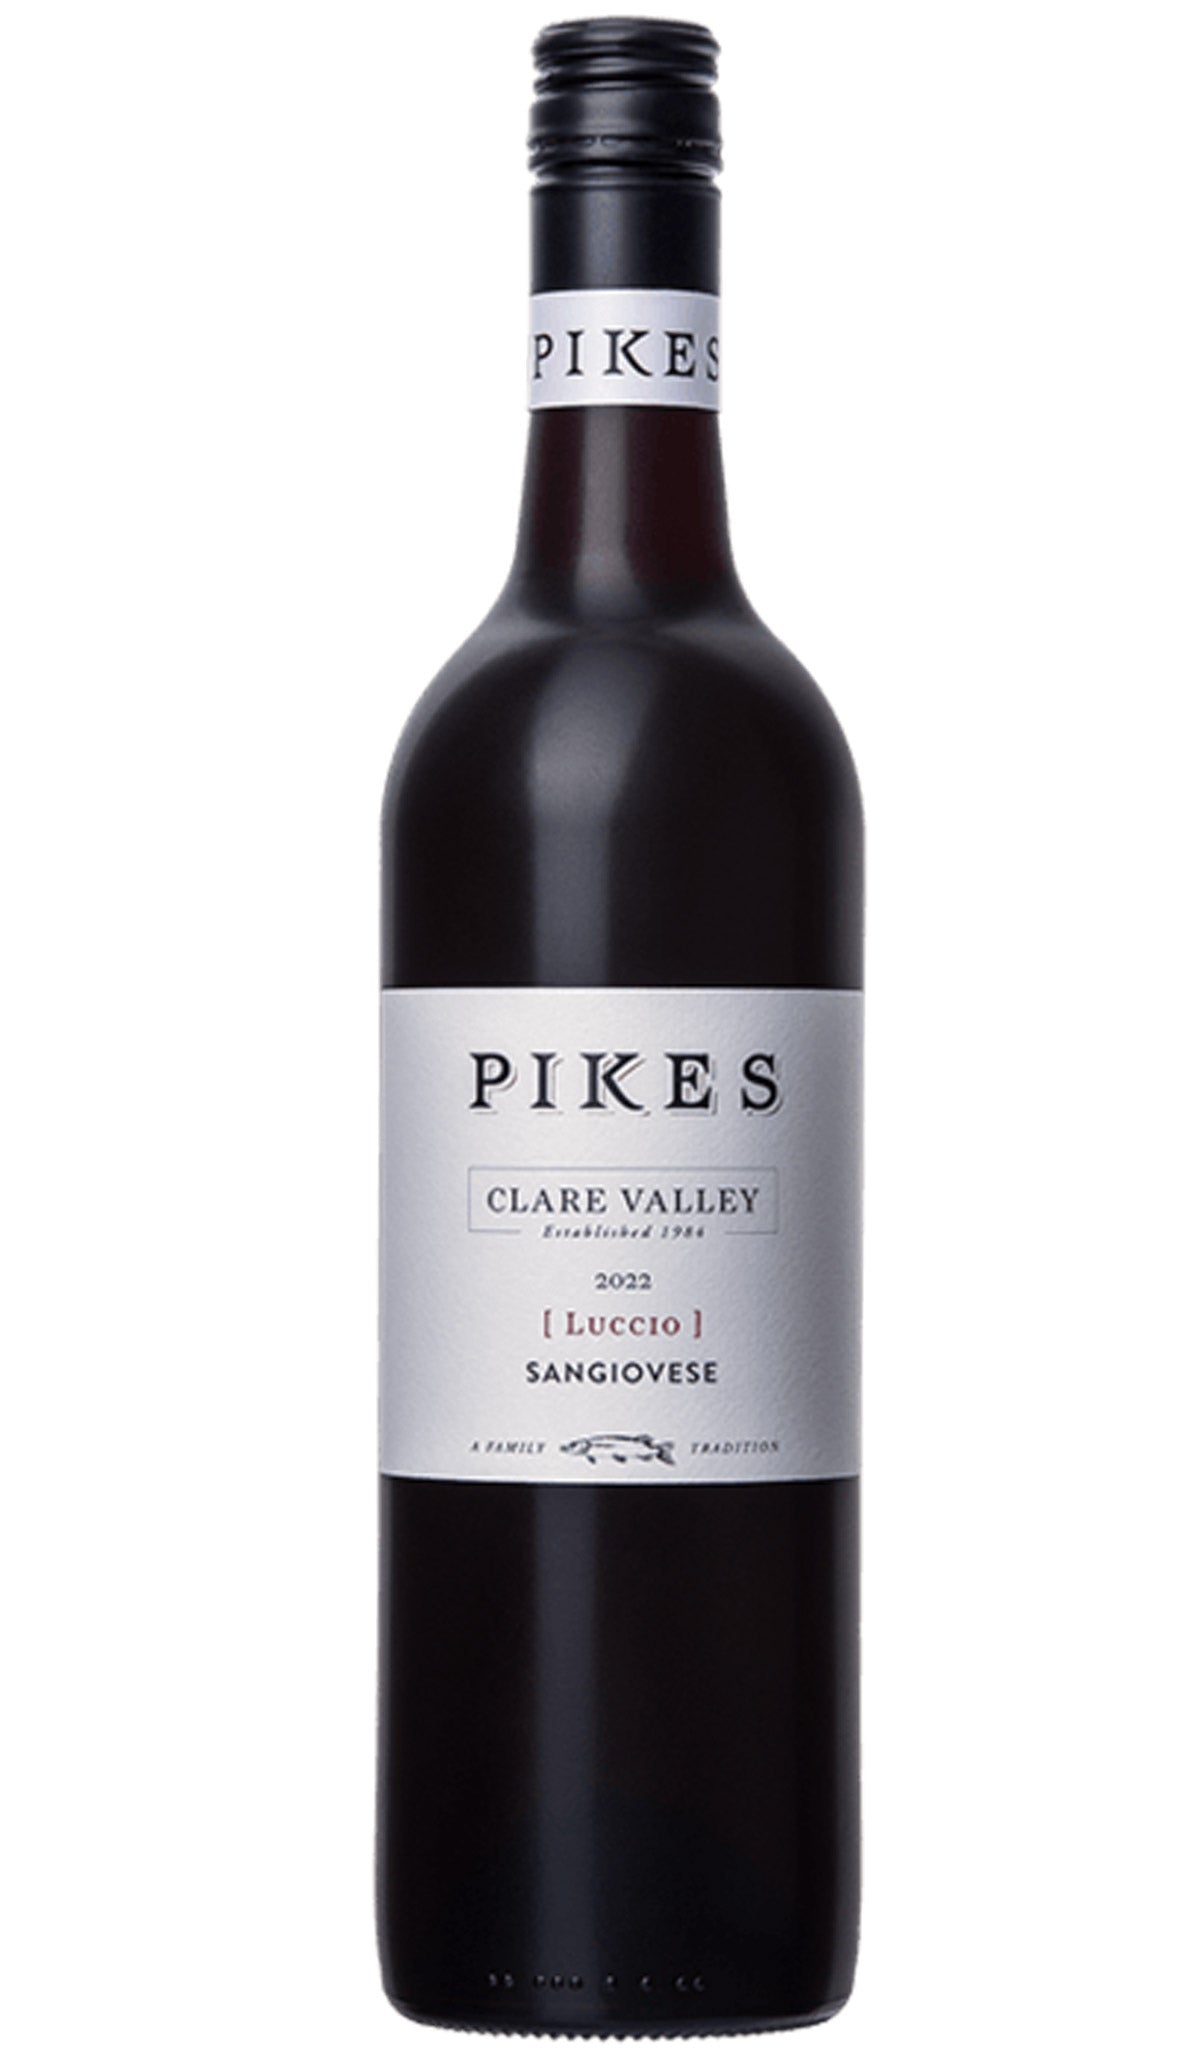 Find out more, explore the range and purchase Pikes Luccio Sangiovese 2022 (Clare Valley) available online at Wine Sellers Direct - Australia's independent liquor specialists.